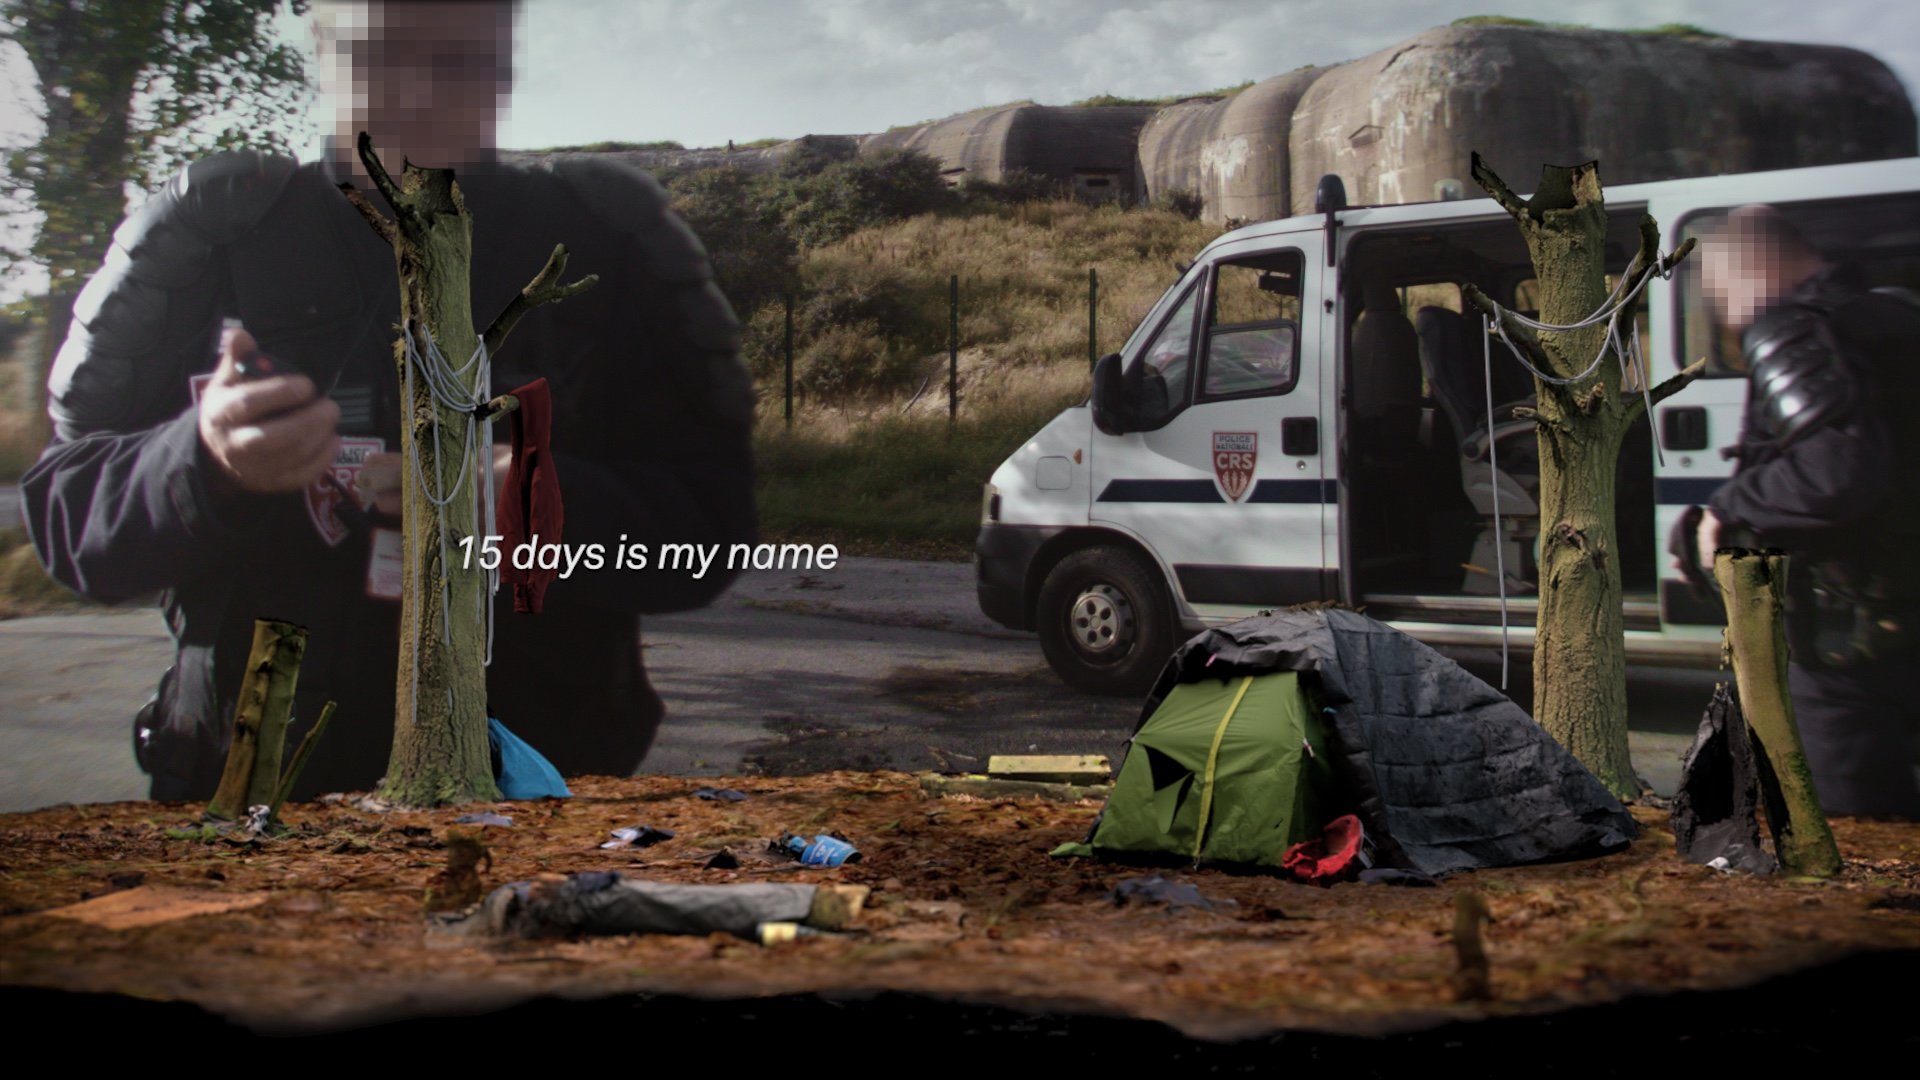 A wet campground with a frail tent in the midst of muddy scrubland and trees.. This image appears in the foreground, collaged on top of a backdrop image of a police vehicle and policemen, with their faces blurred for anonymity. The words "15 days is my name" appear across the screen in white text.